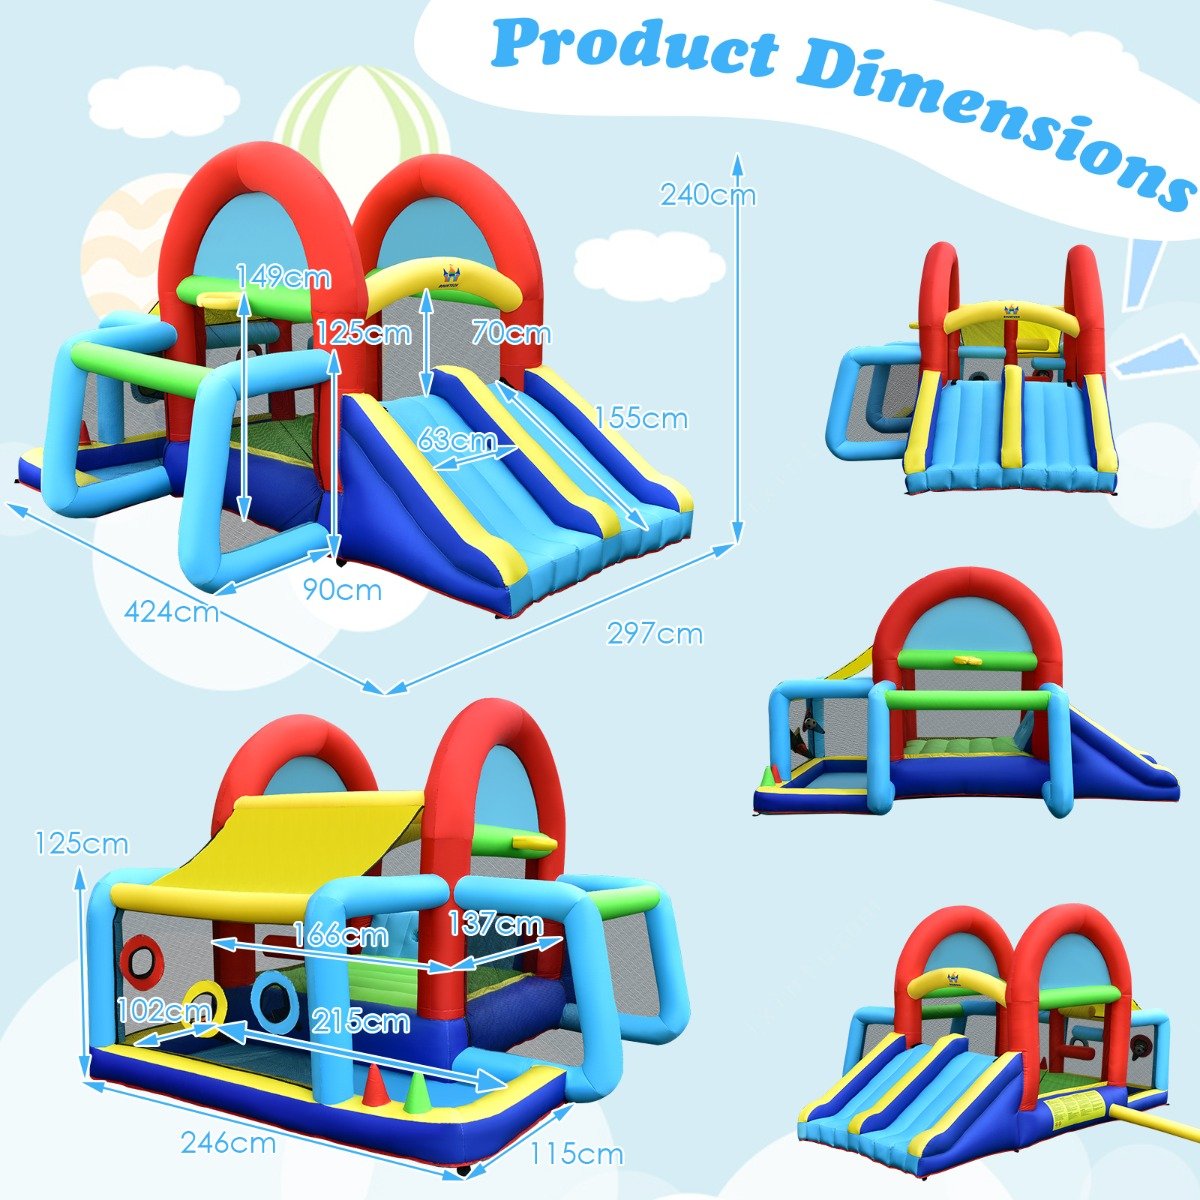 Dual Slide Inflatable Bounce House - Jumping Fun for Children (Blower Included)